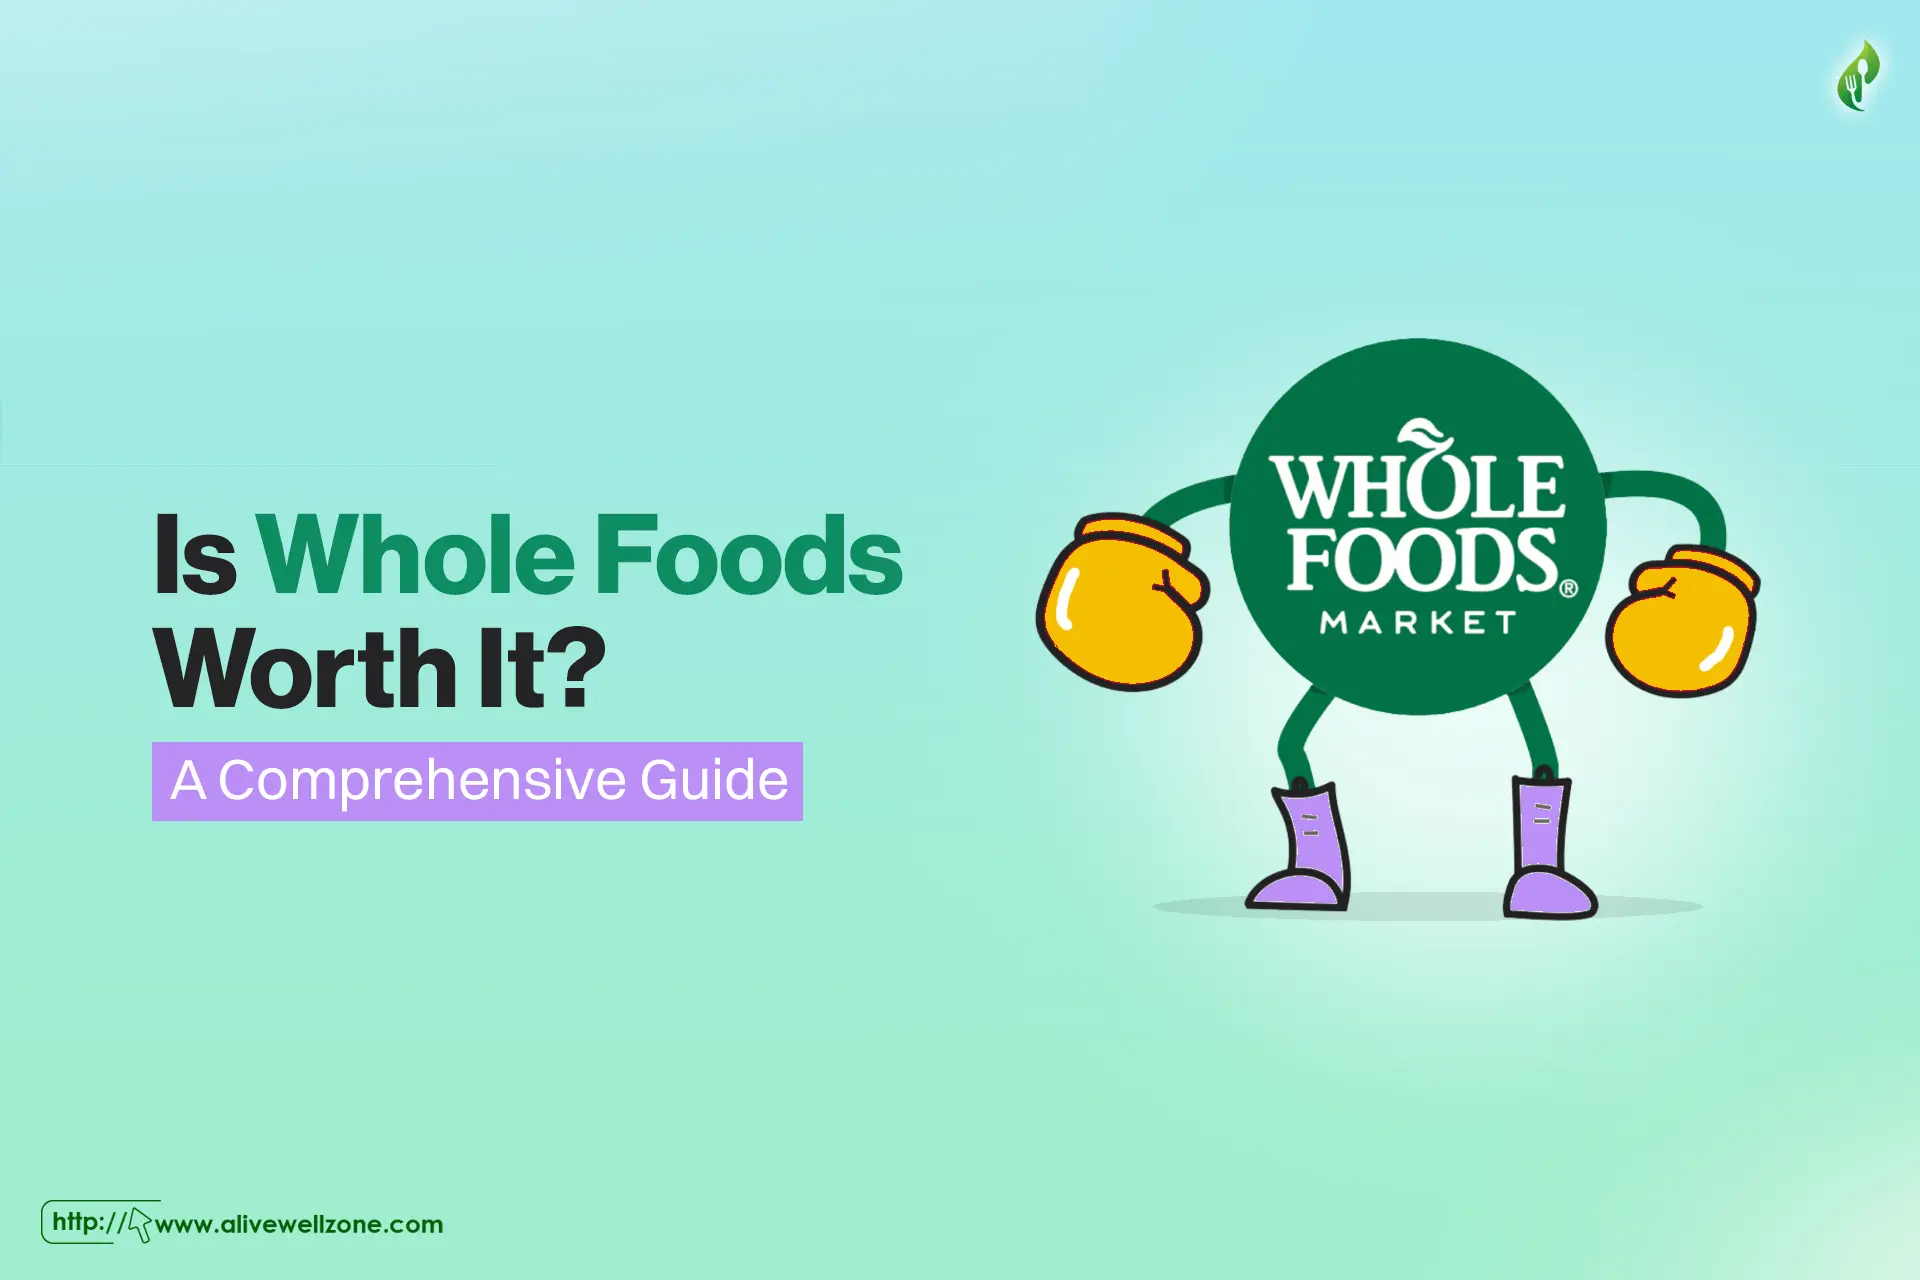 is whole foods worth it?